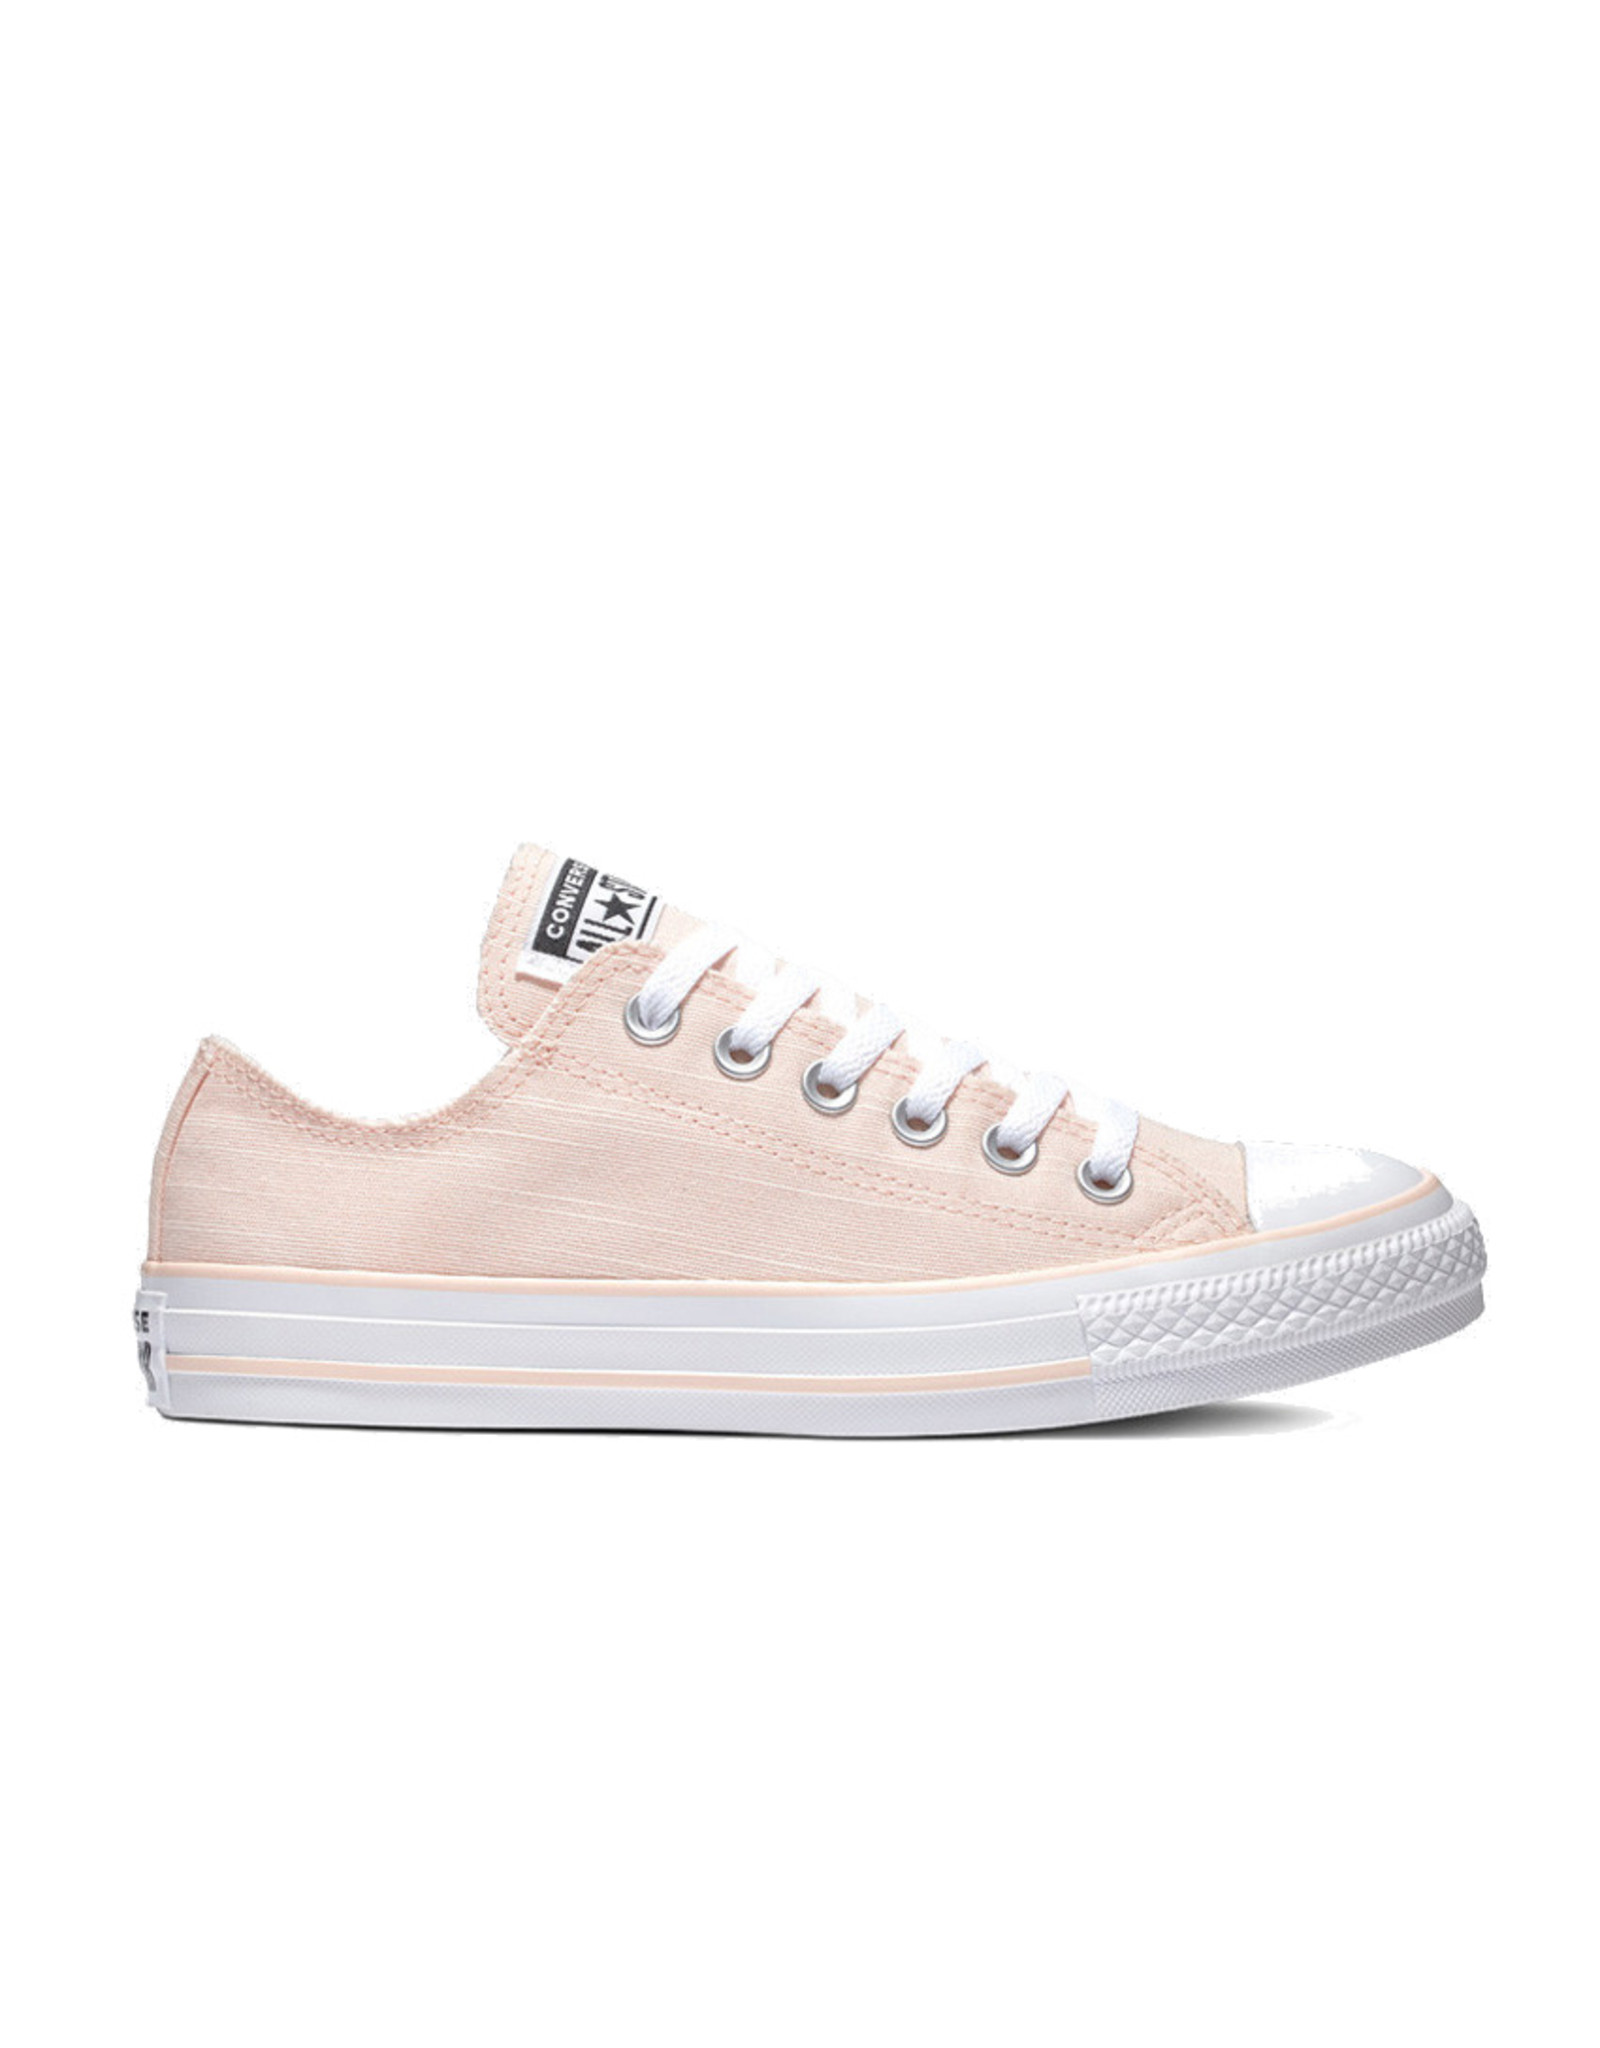 CHUCK TAYLOR ALL STAR OX WASHED CORAL/WHITE/WHITE C13CO-564343C